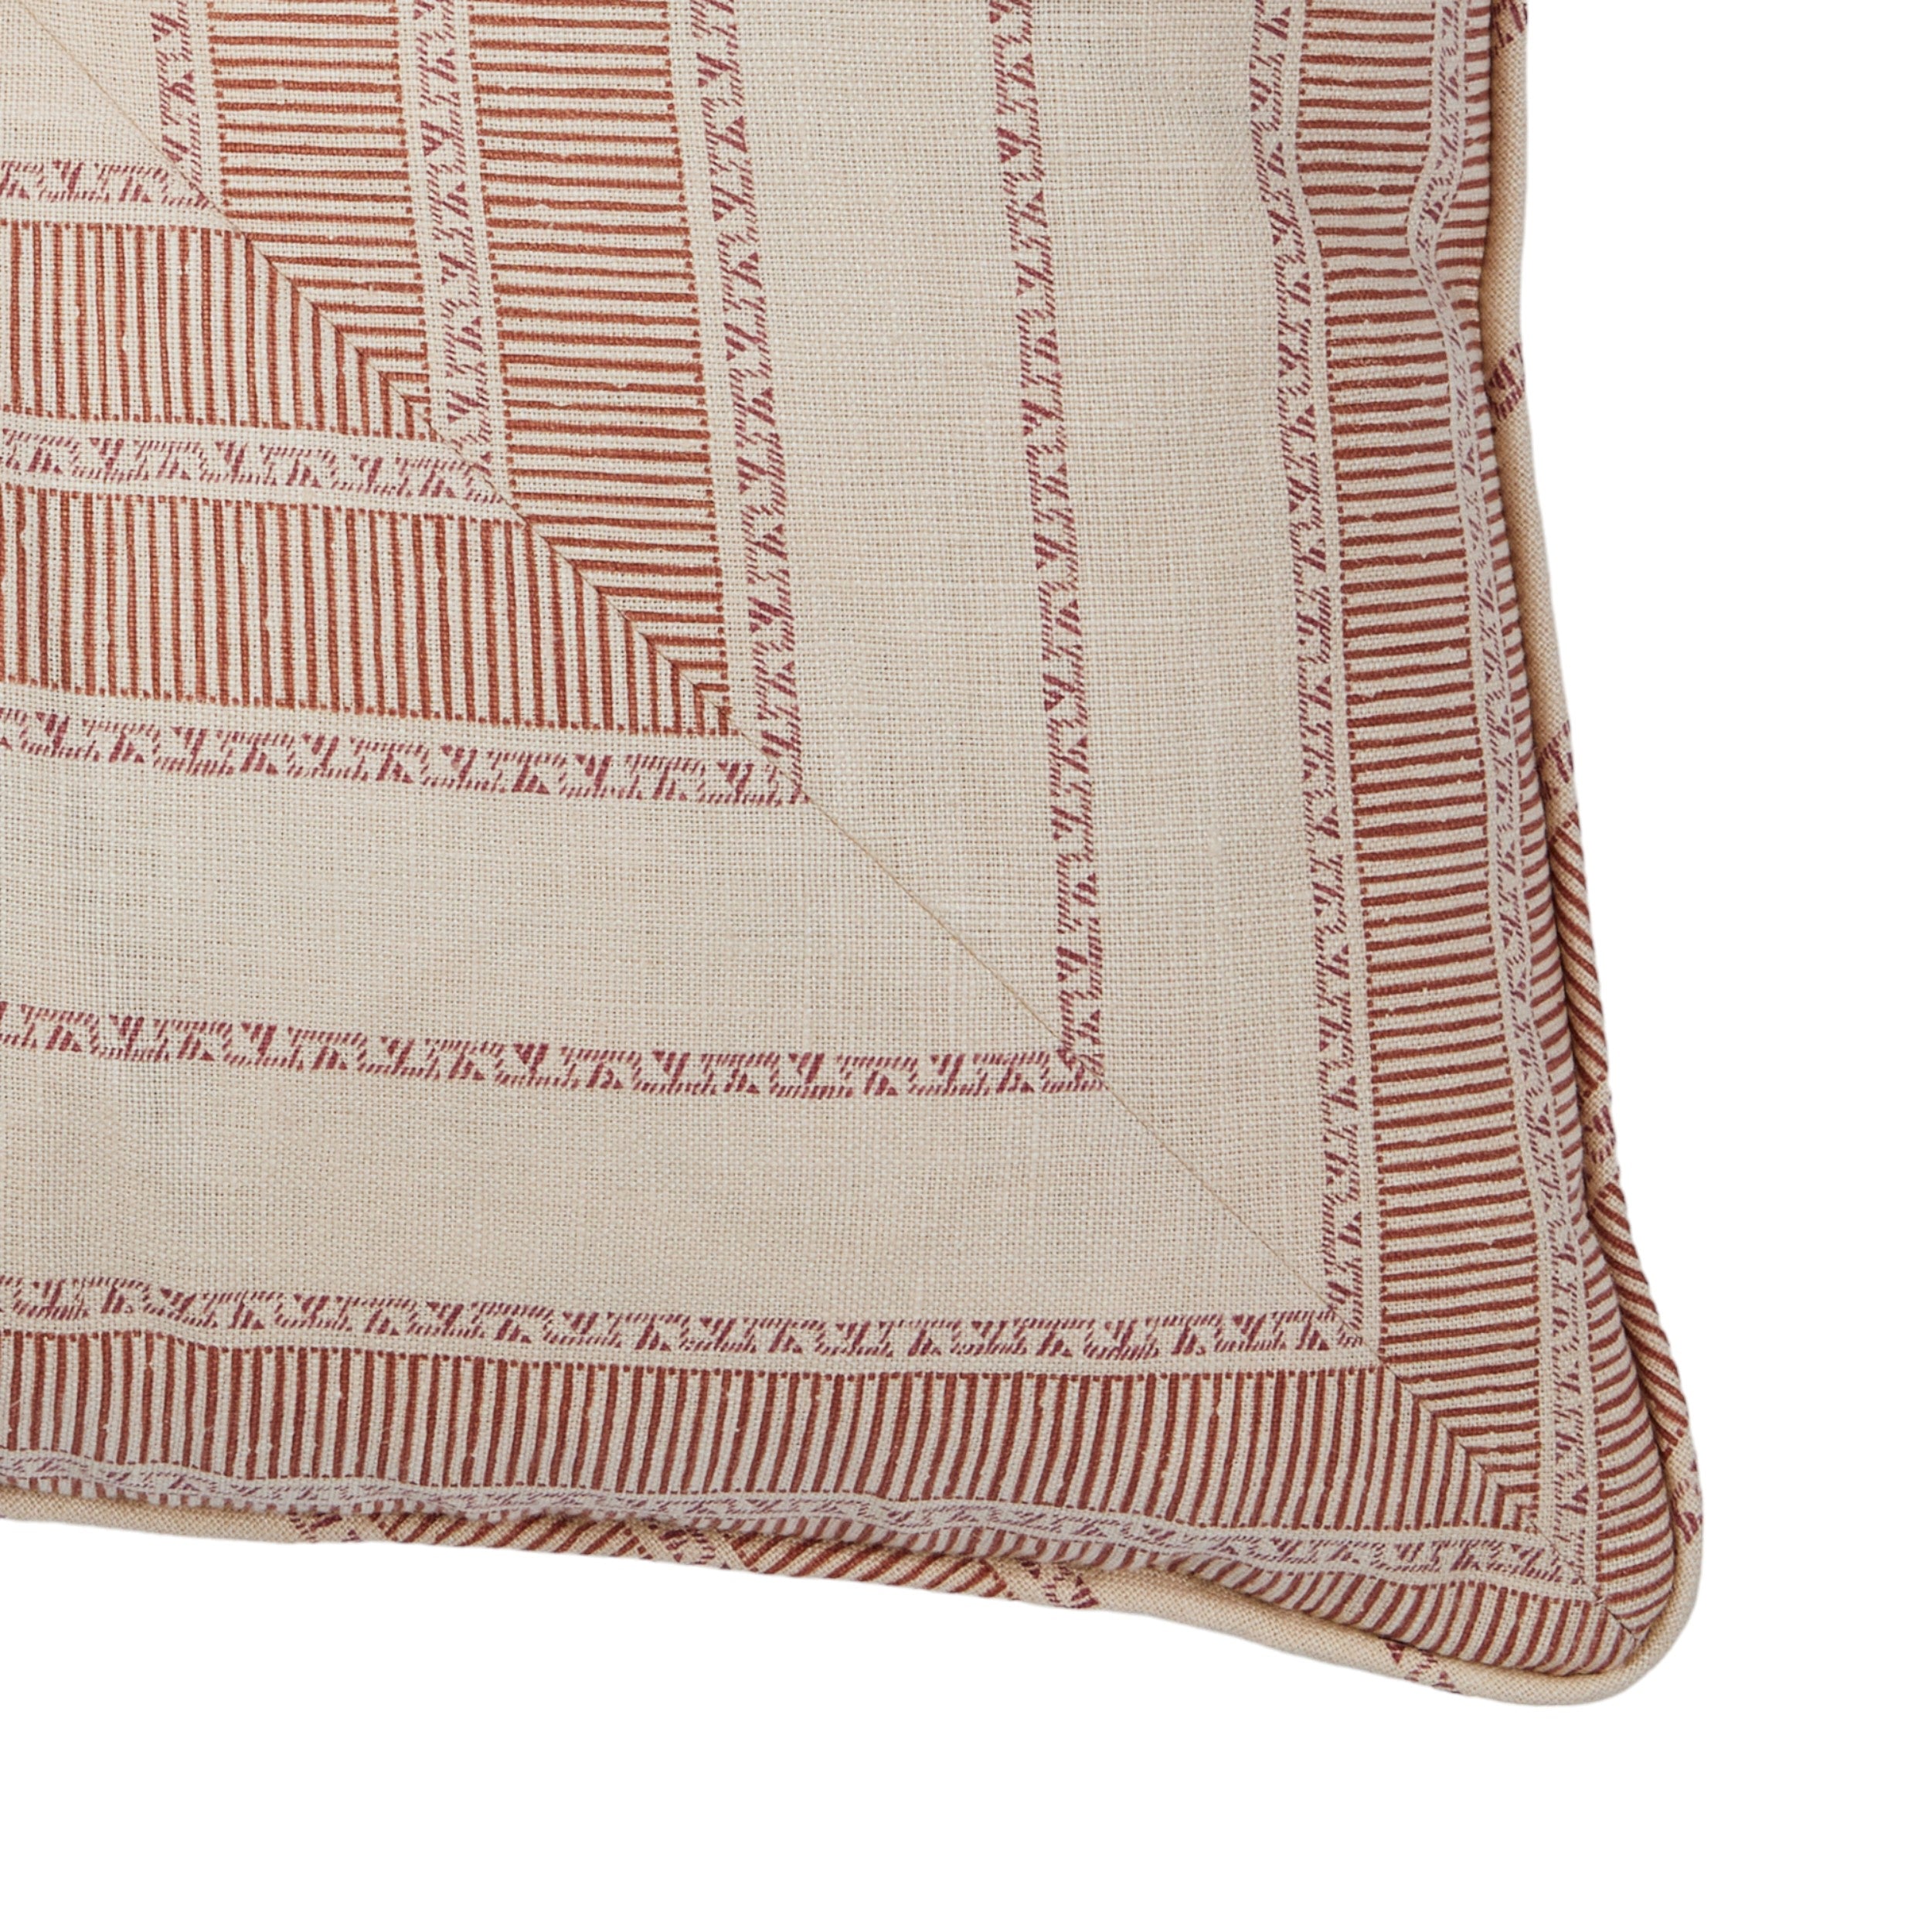 Sifnos Amber Buttoned Envelope Cushion